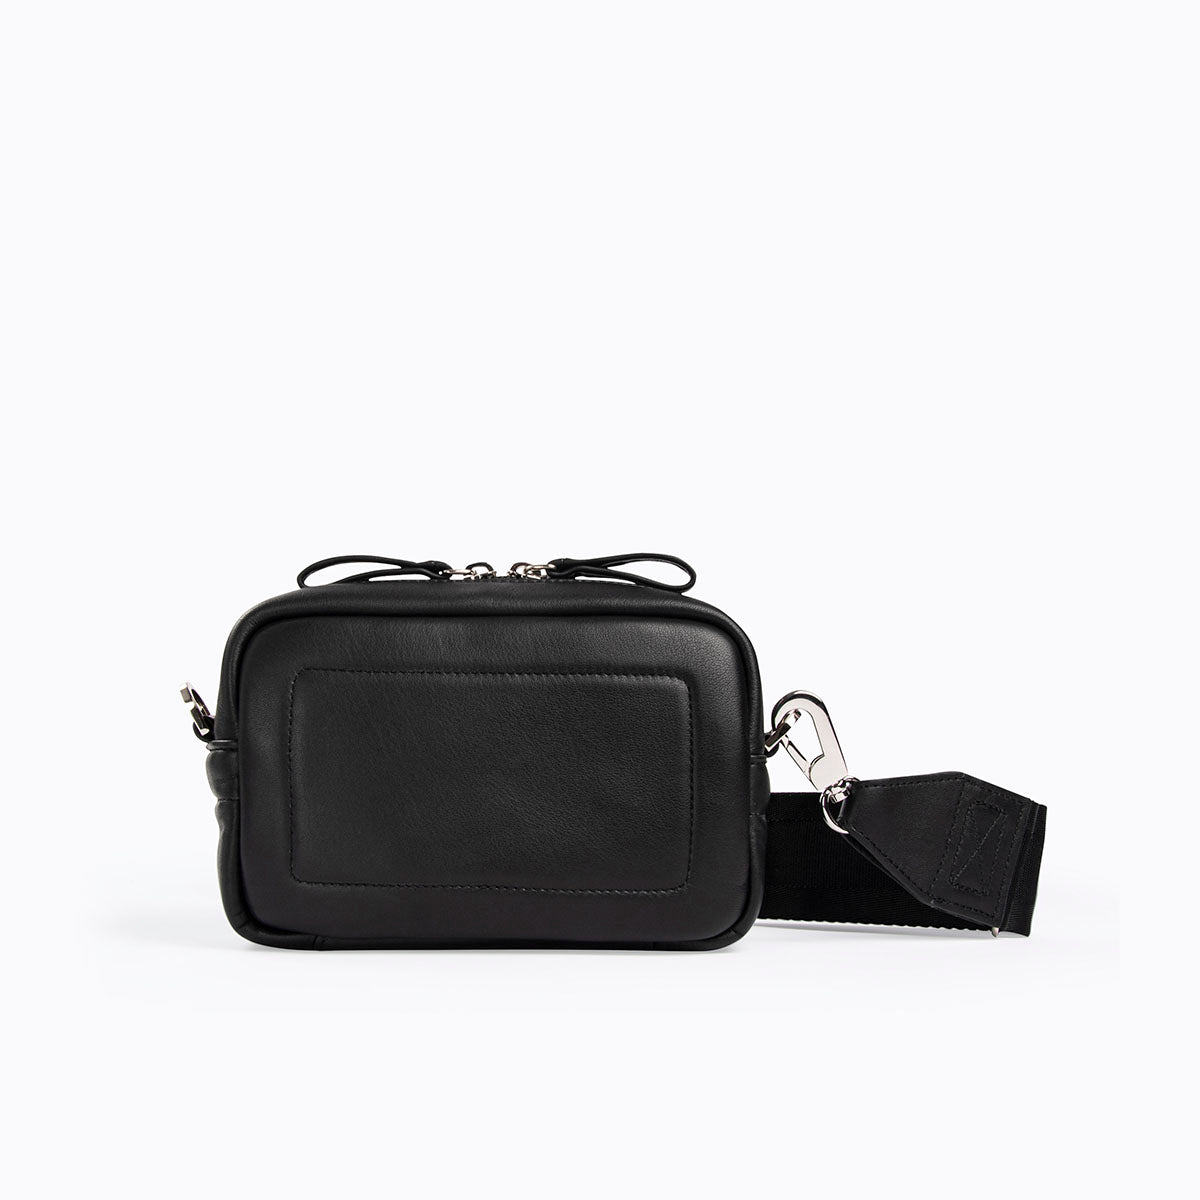 Comet Bumbag - Luxury Other Leathers Black